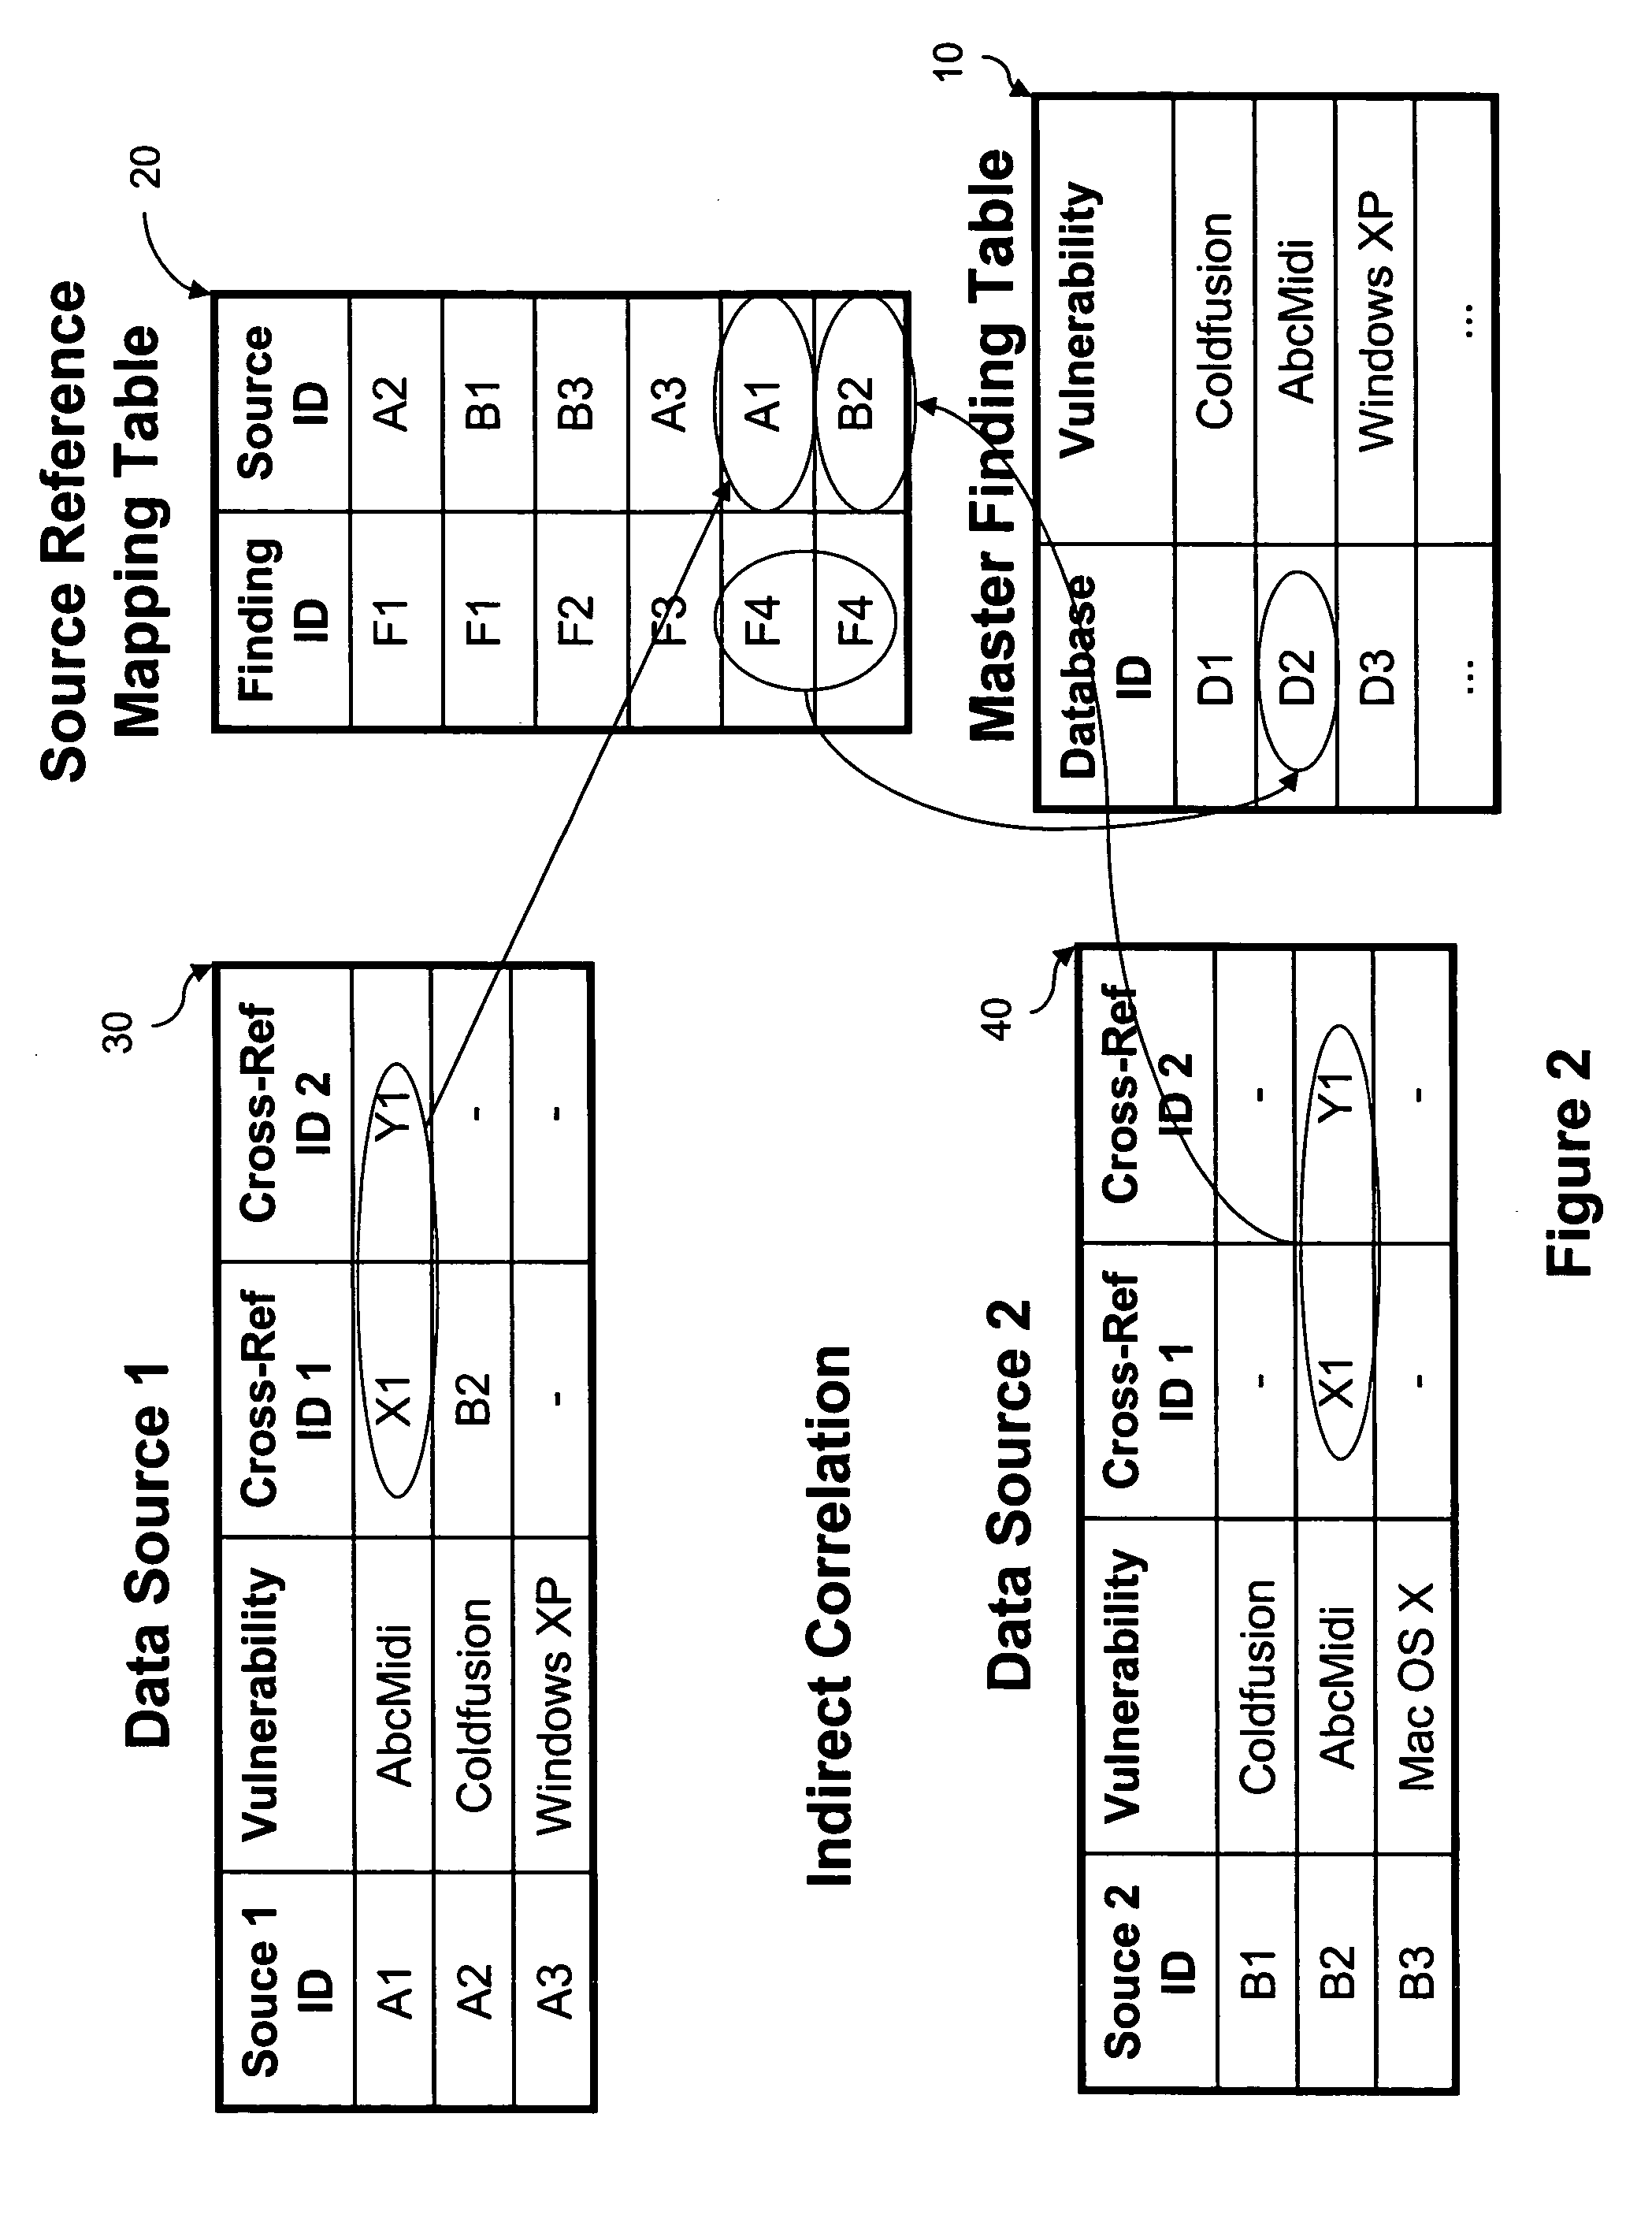 System and method for managing security testing